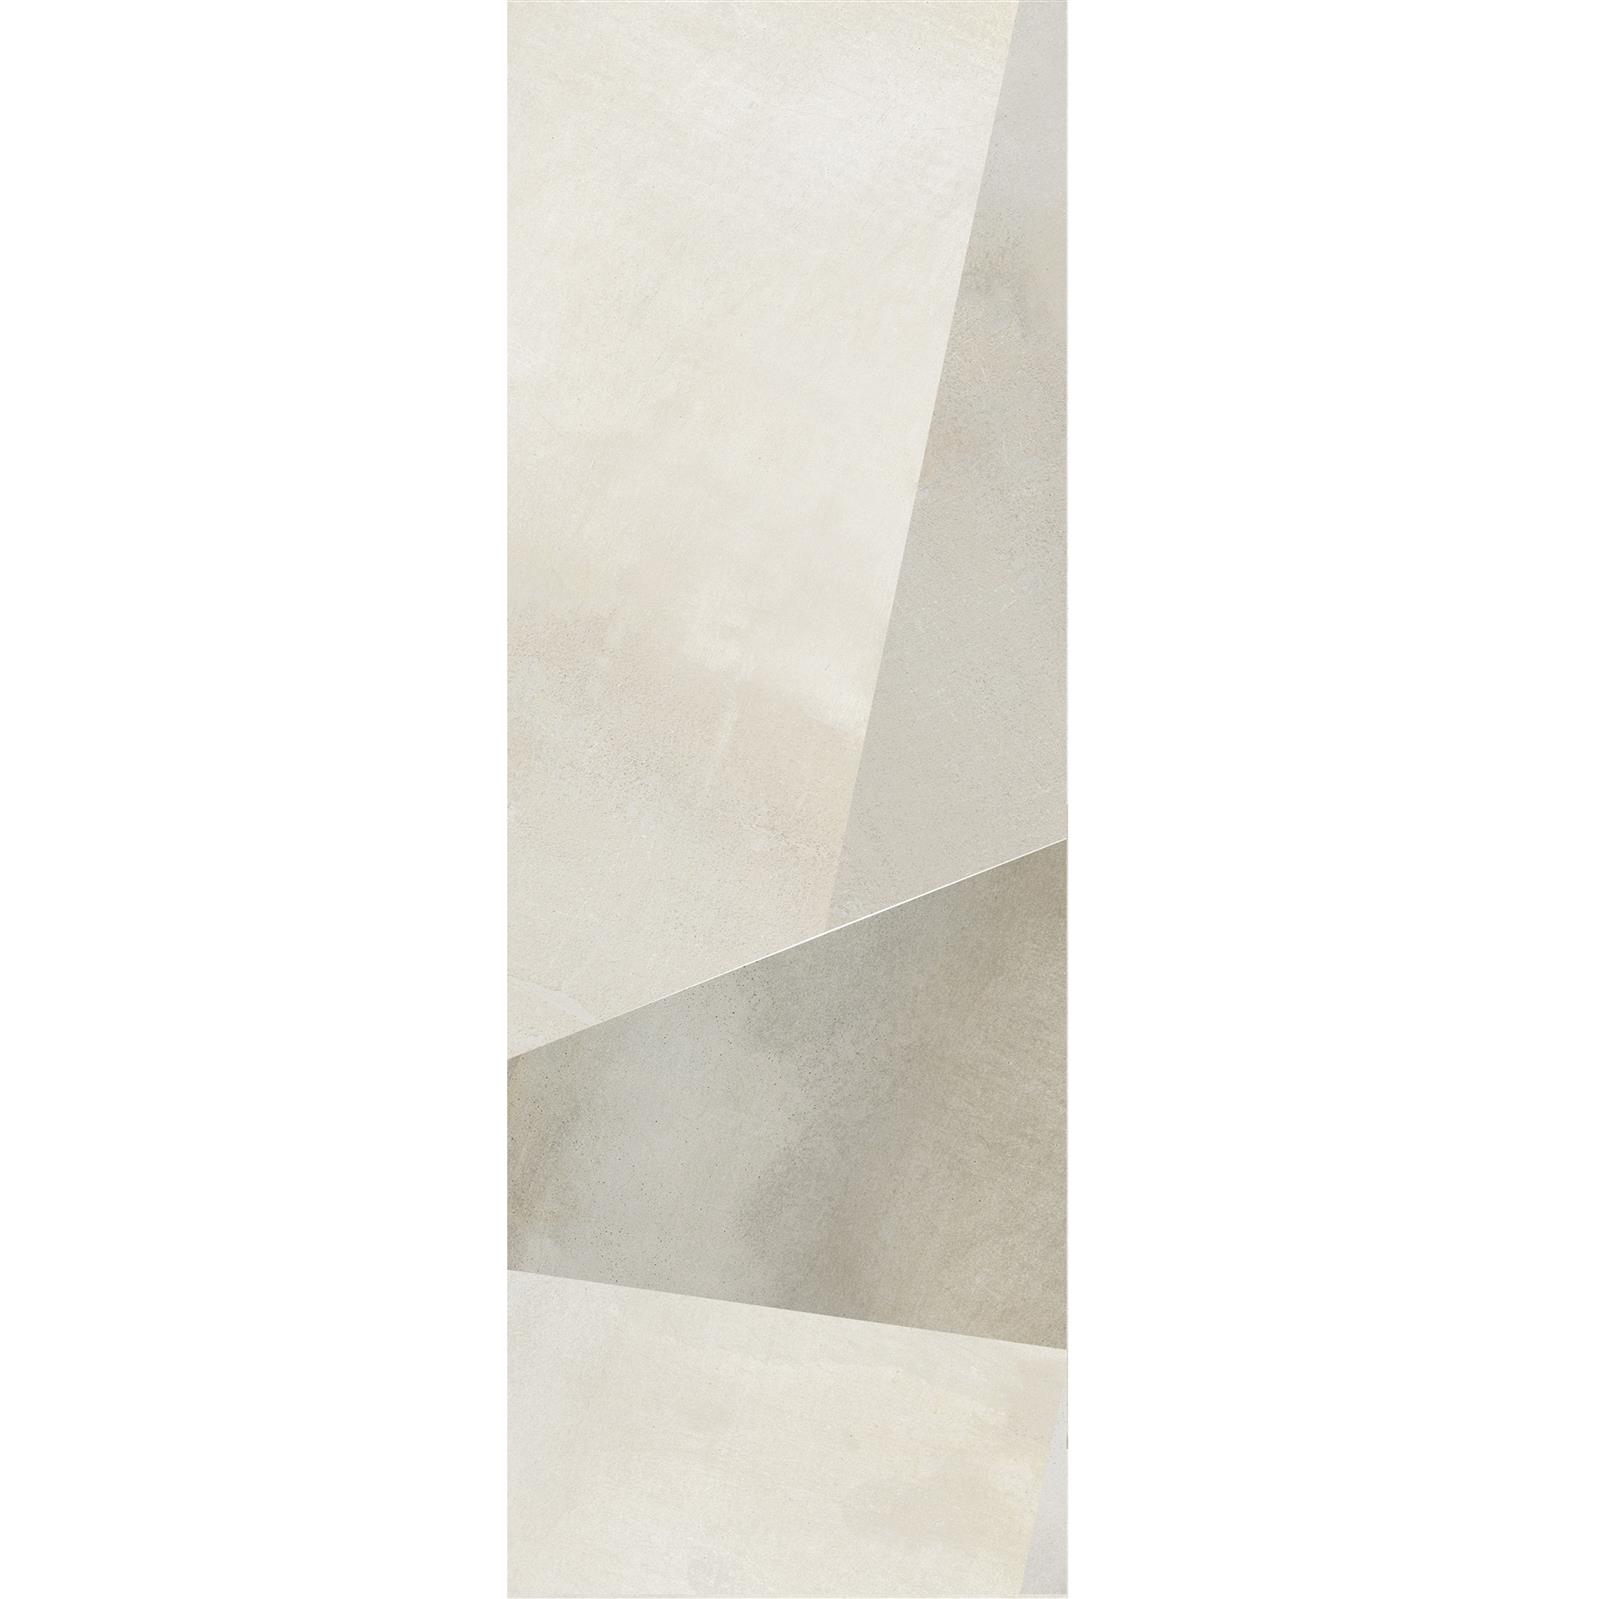 Wall Tiles Queens Rectified Sand Decor 9 30x90cm